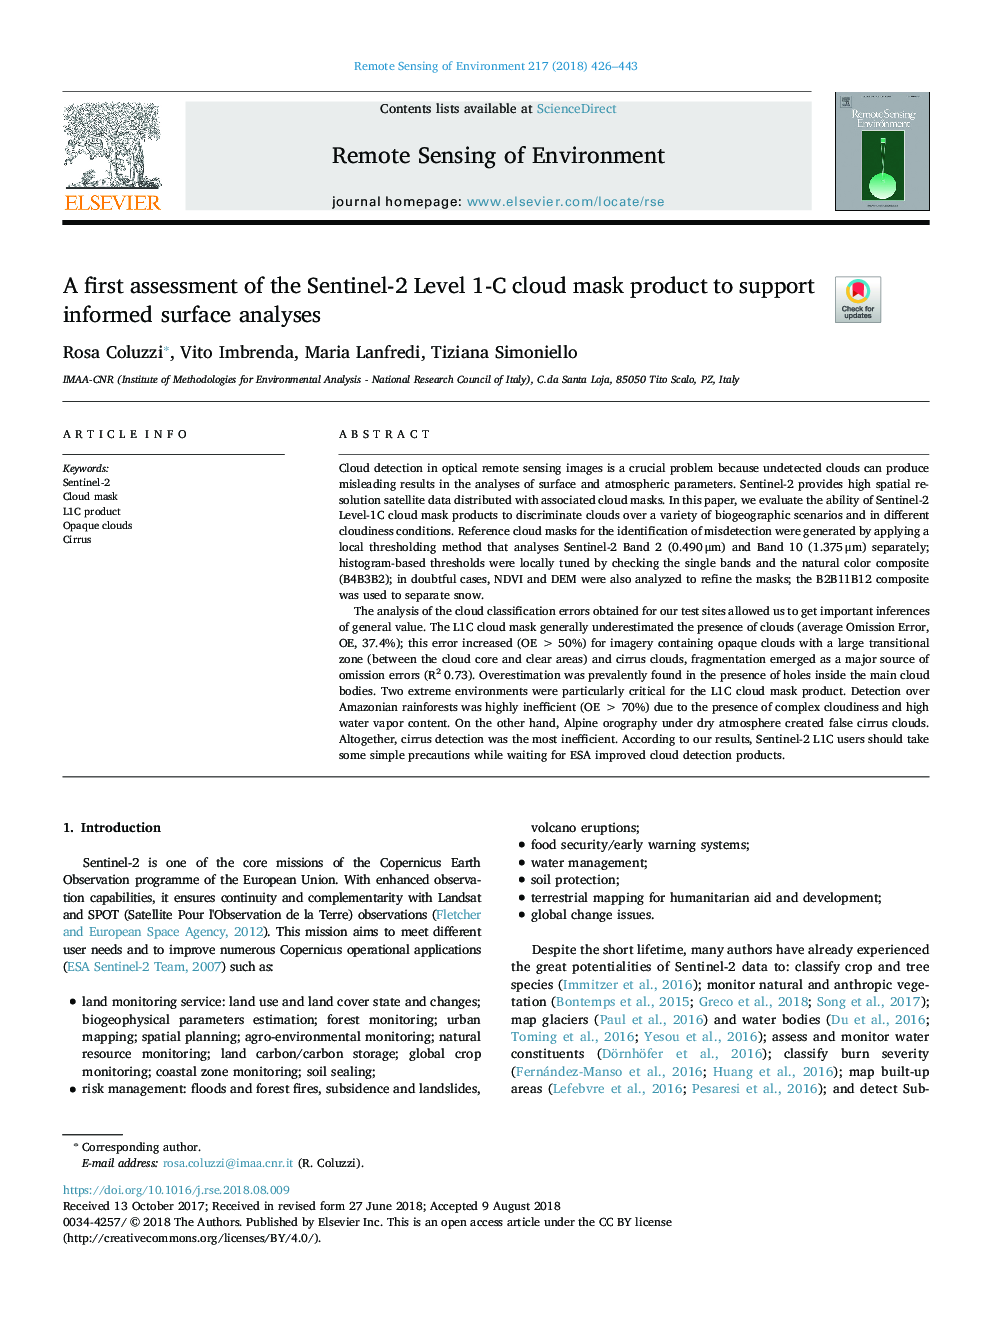 A first assessment of the Sentinel-2 Level 1-C cloud mask product to support informed surface analyses